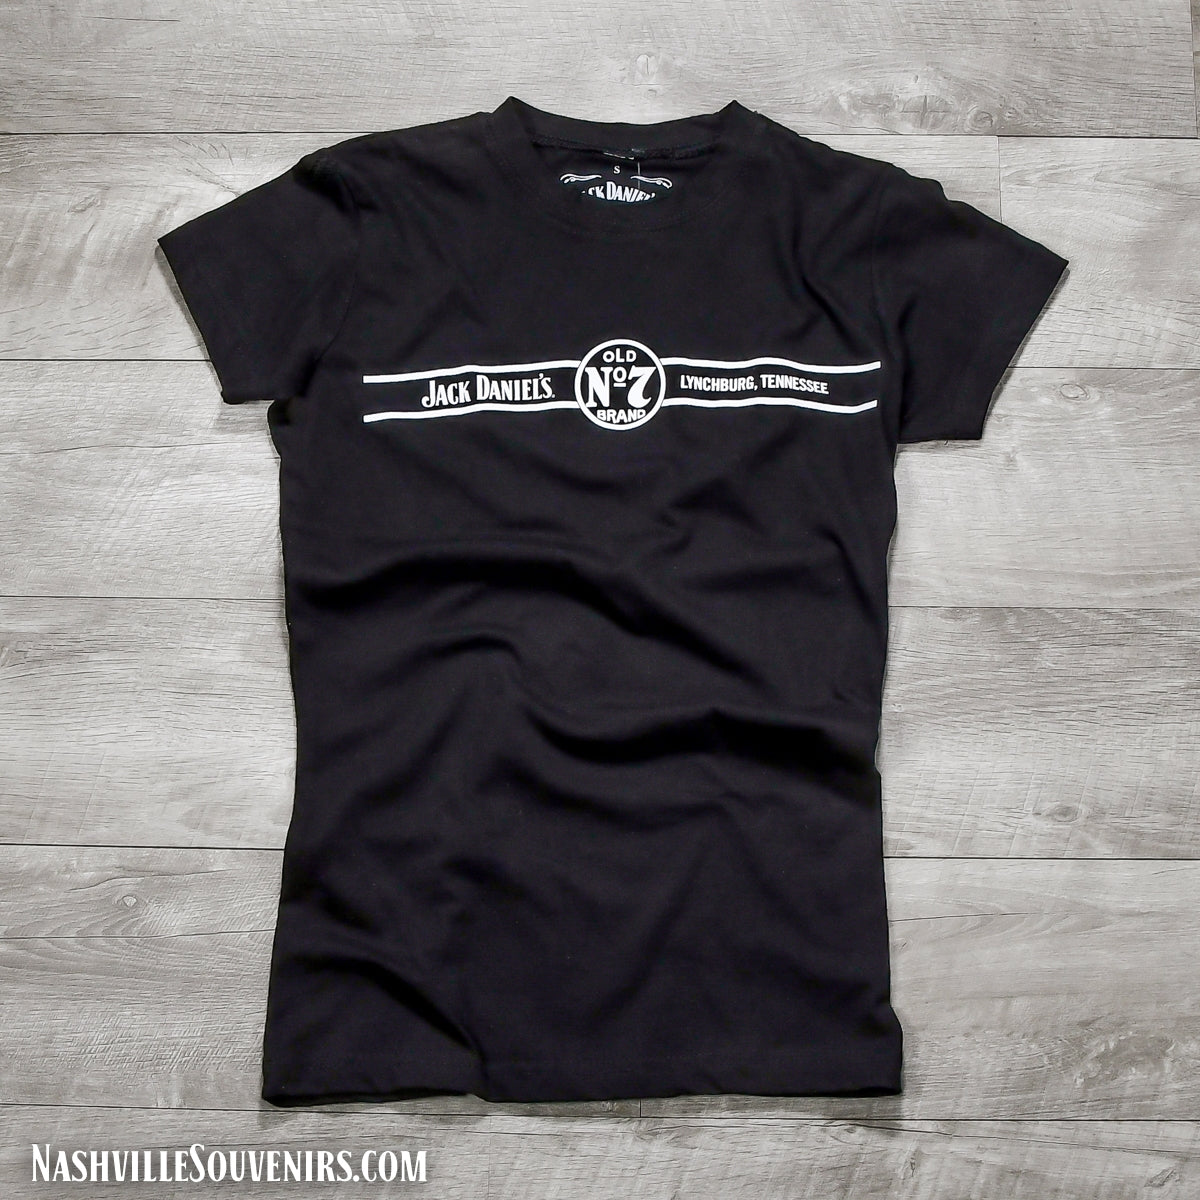 Officially licensed Jack Daniels Women's Old No.7 Lynchburg Tennessee T-Shirt in black. Get yours today with FREE SHIPPING on all US orders over $75!